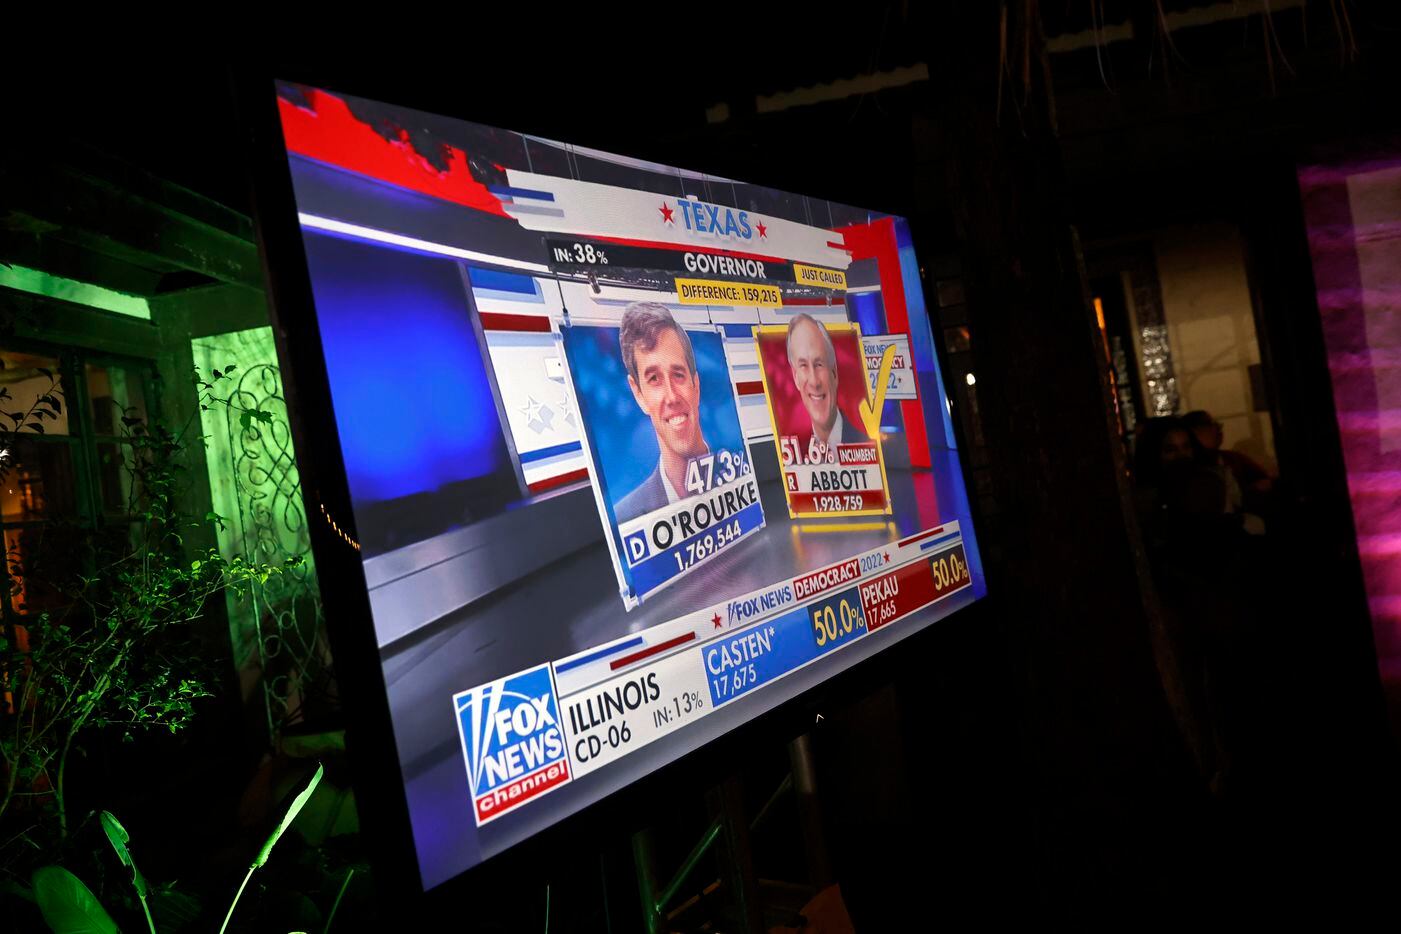 A Fox News graphic shows Texas Governor Greg Abbott defeating challenger Beto O’Rourke...